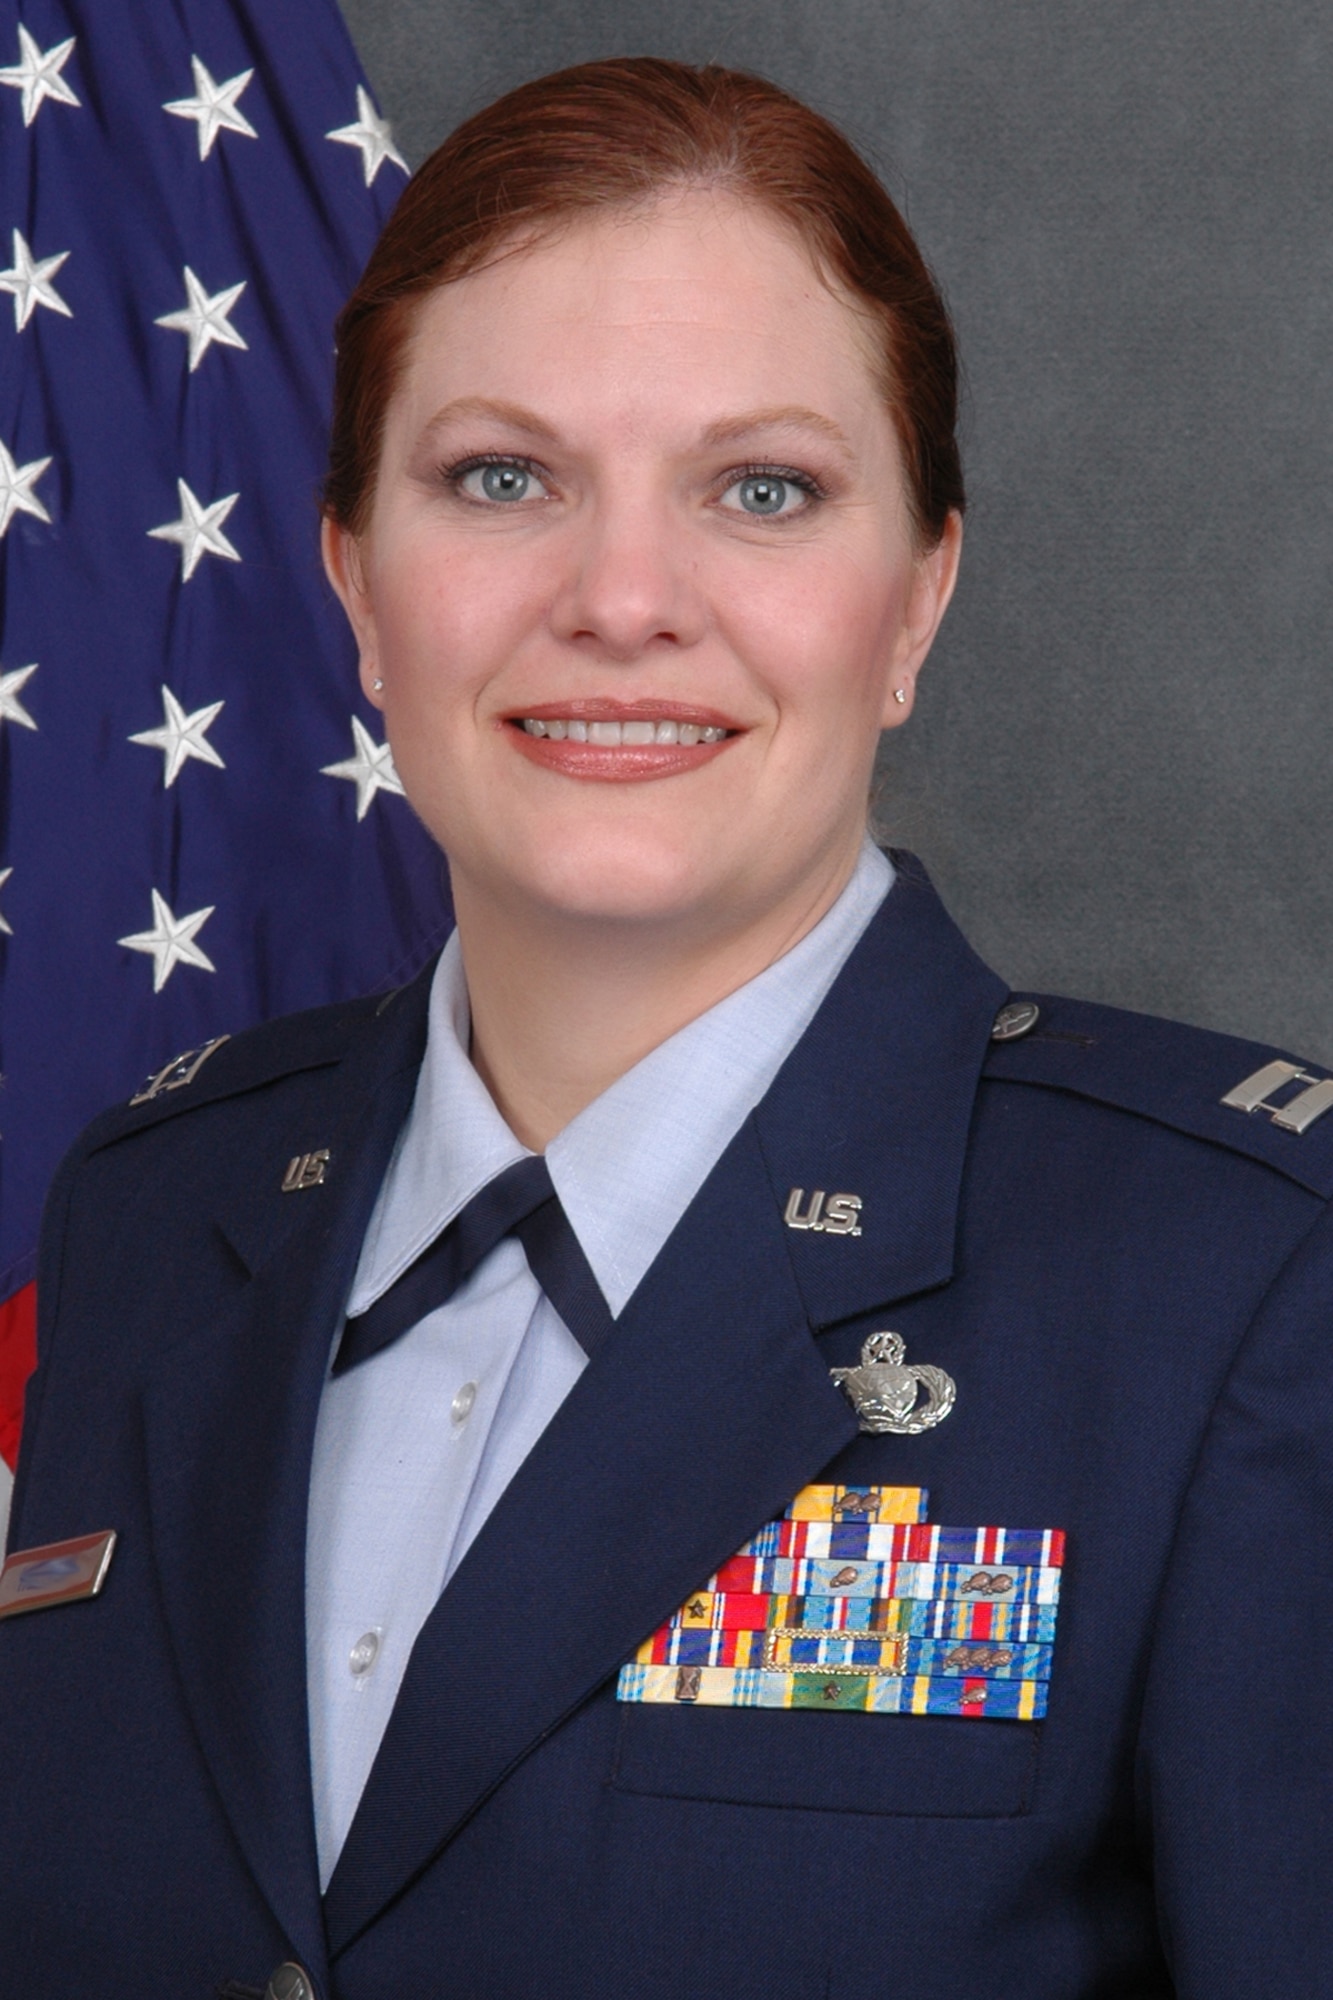 GRISSOM AIR RESERVE BASE, Ind., -- Capt. Kelly Howard, a public affairs officer with the 434th Air Refueling Wing, is Grissom's Officer of the Year. (U.S. Air Force photo/Master Sgt. Rob Hoffman)